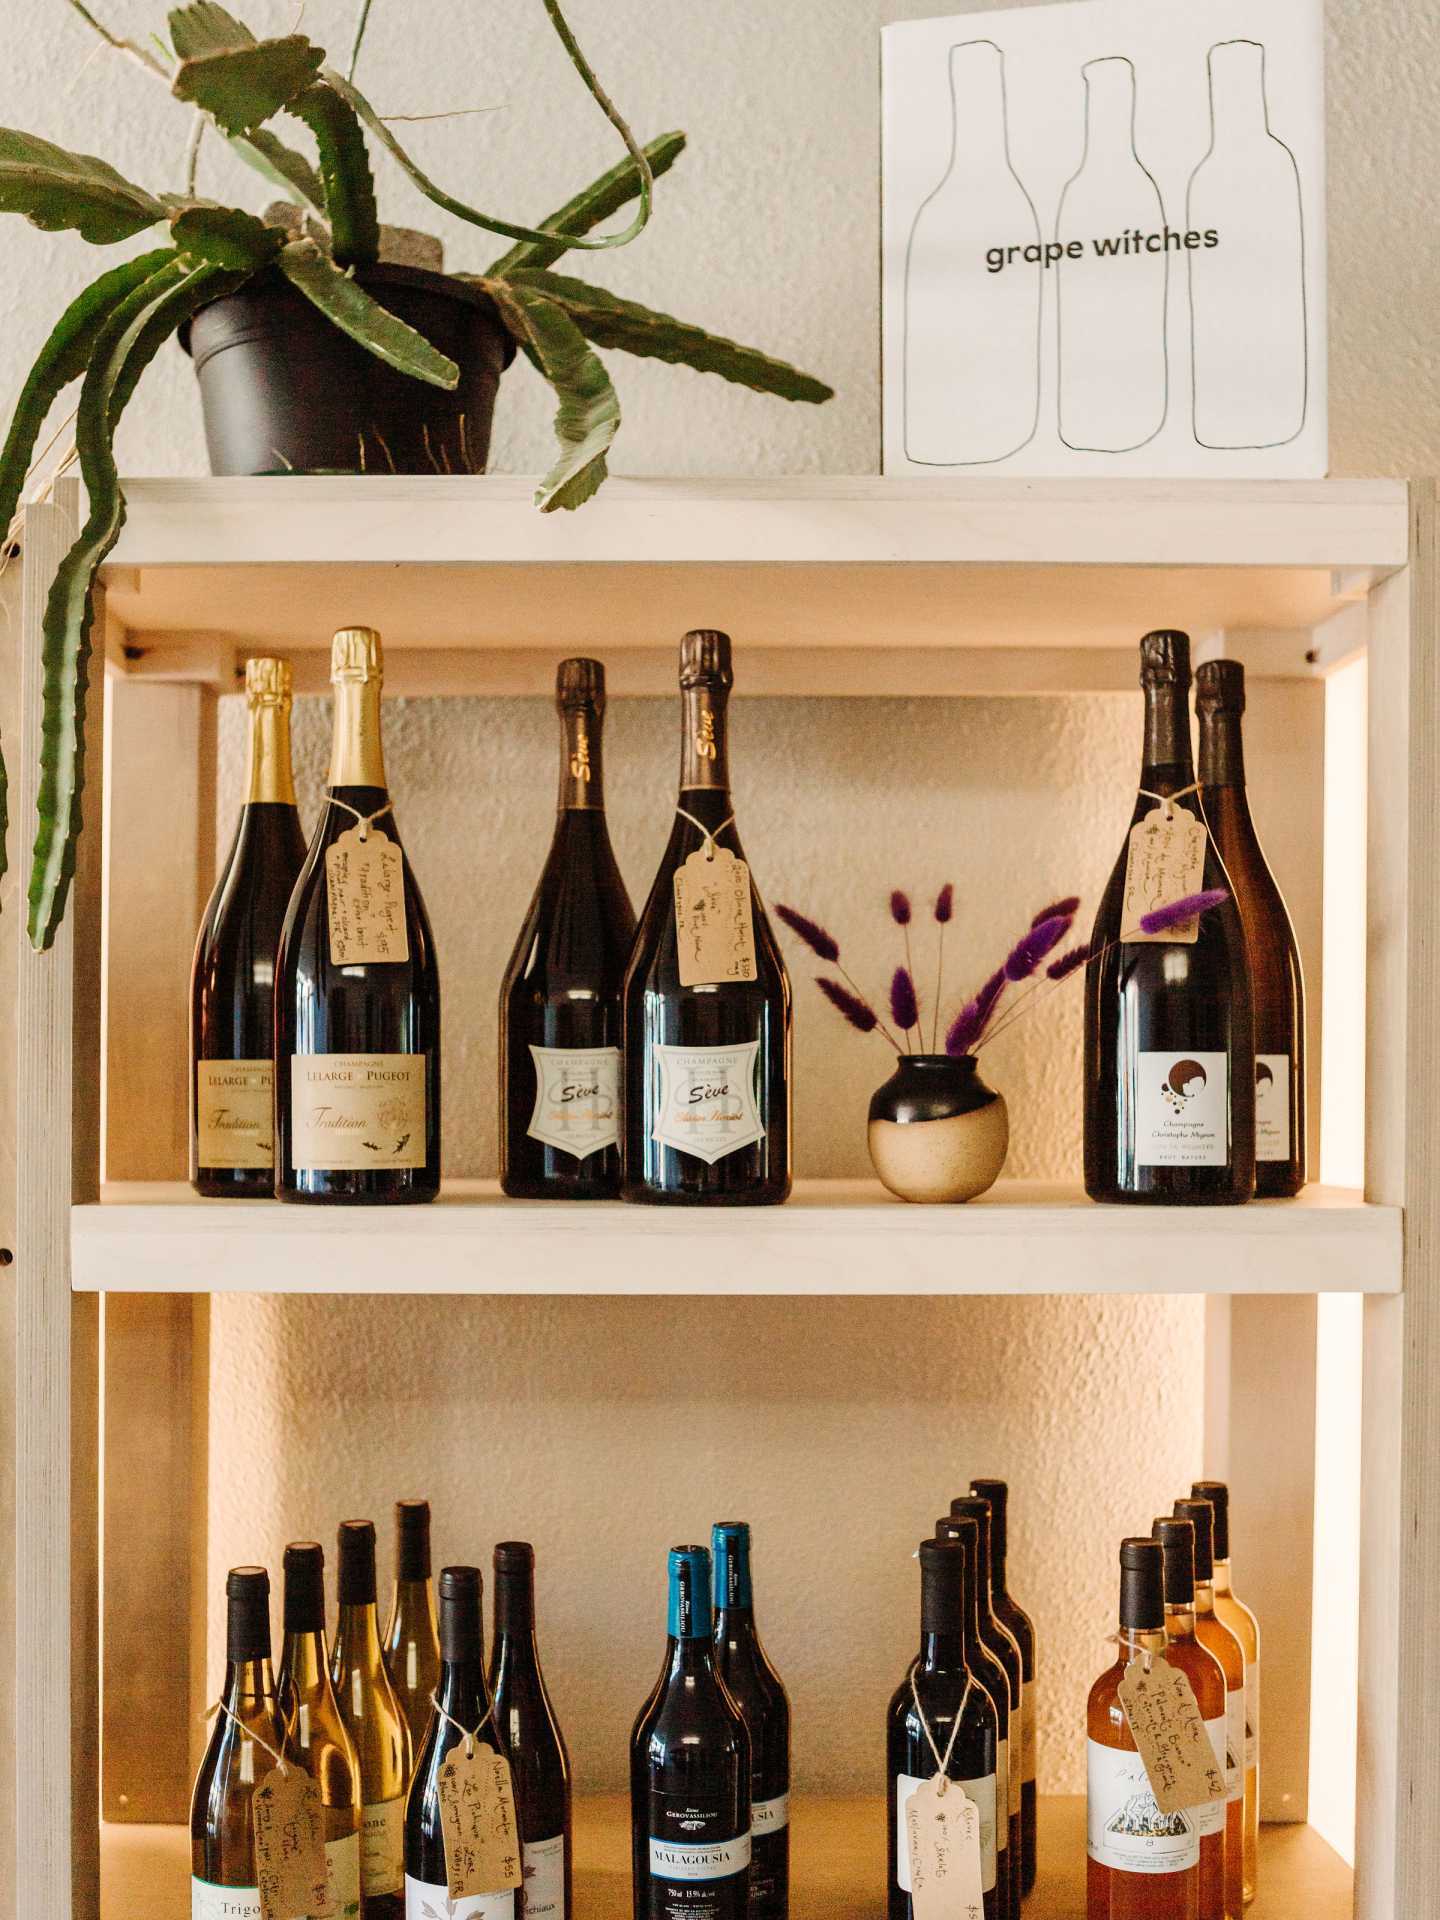 Toronto bottle shops and alcohol stores | A selection of wine at Grape Witches